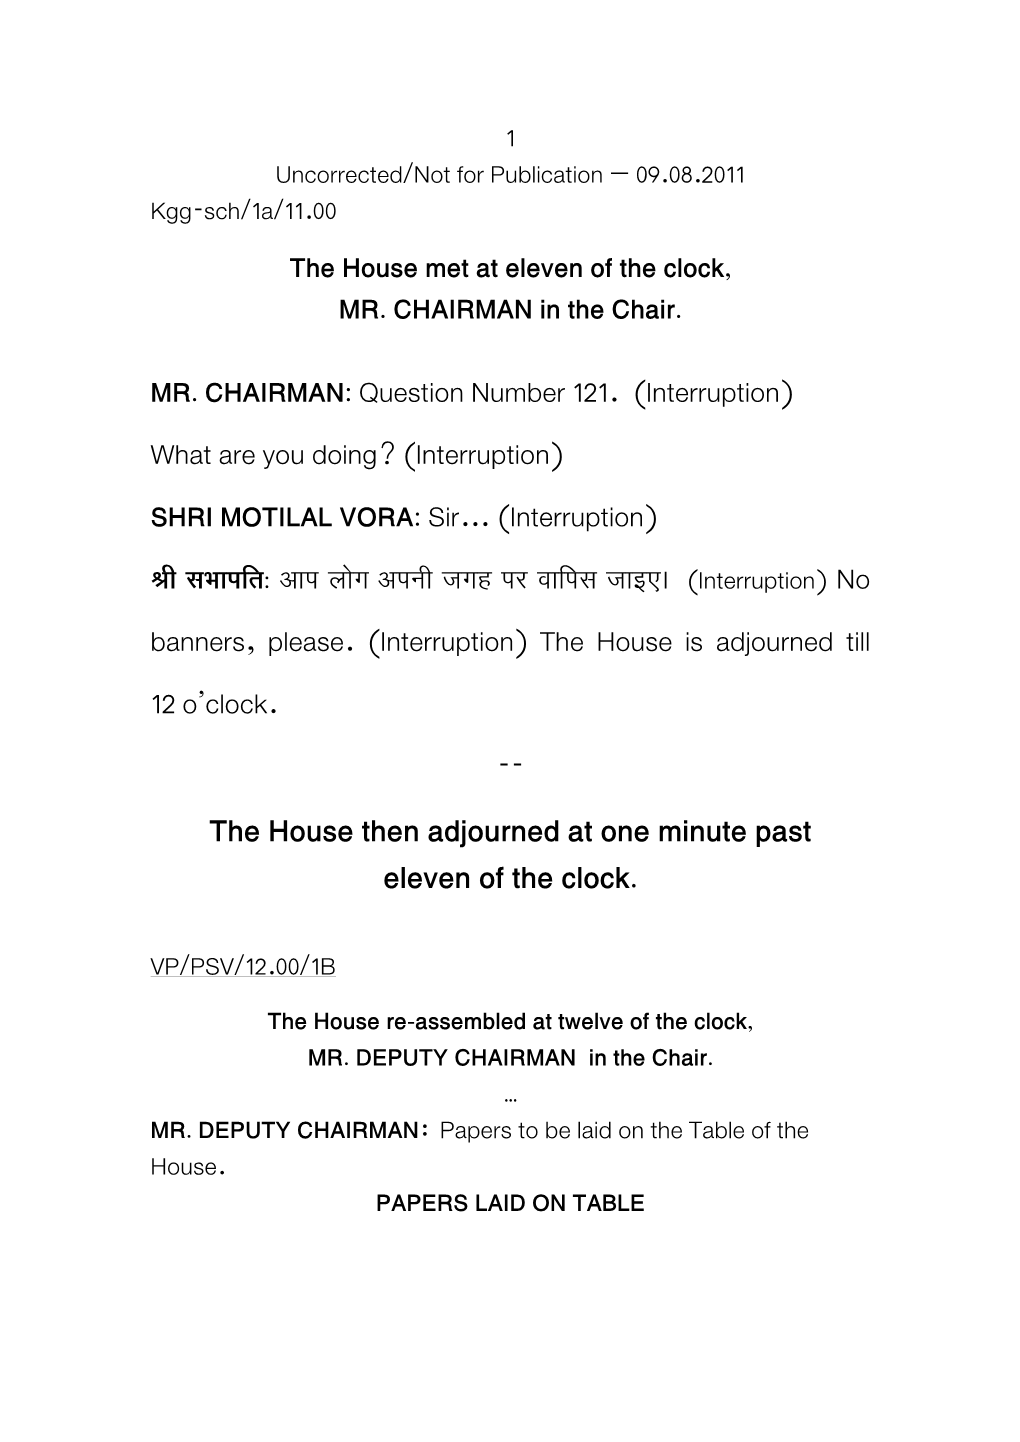 The House Then Adjourned at One Minute Past Eleven of the Clock